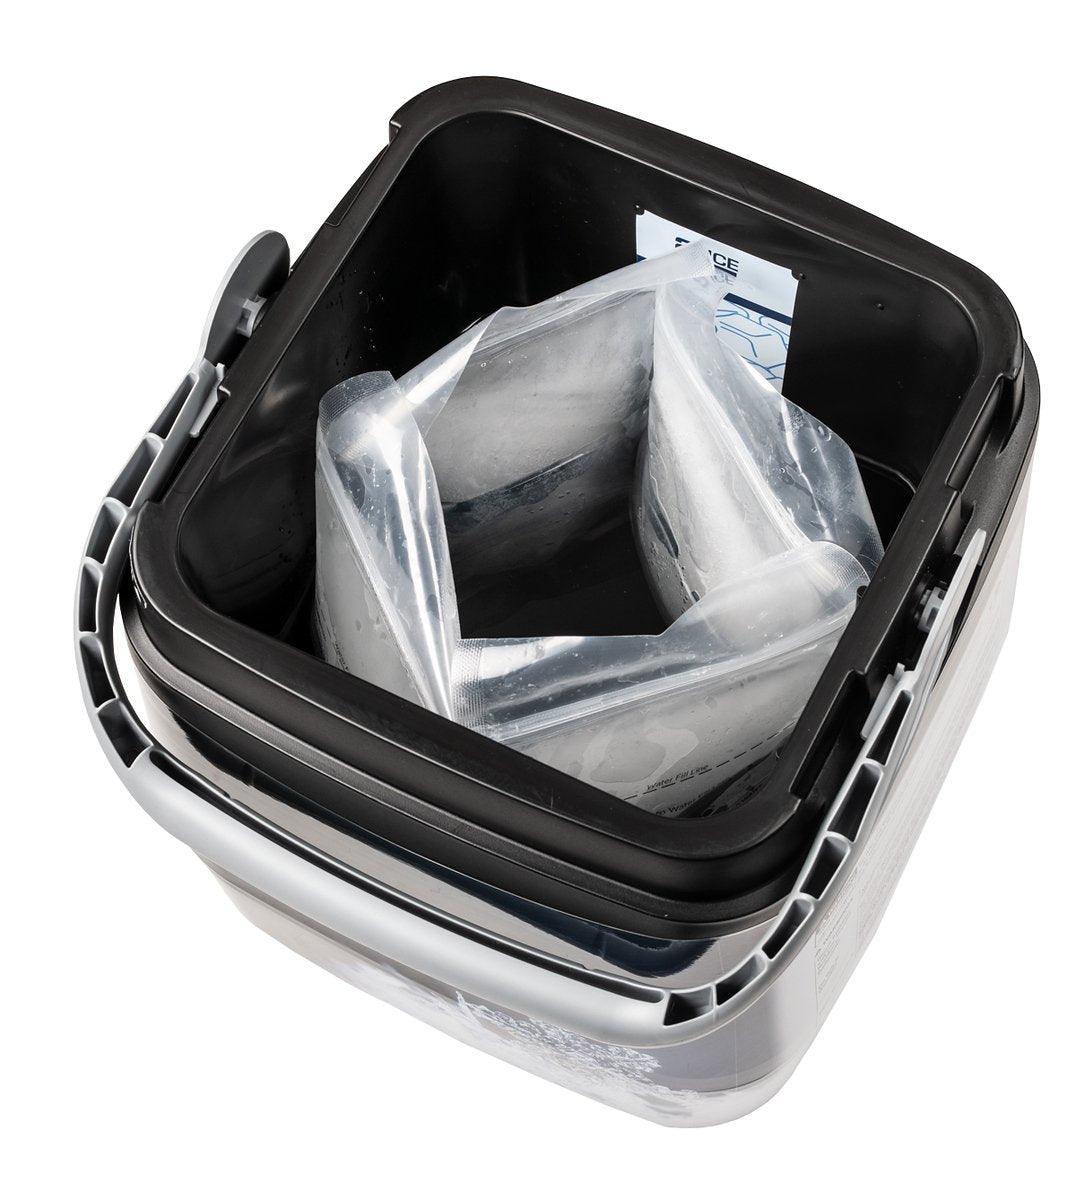 15 Dollar Deals - Ice Freeze Bags (Kit of 12) - SPT-ZBGL3-0 15 Dollar Deals - Ice Freeze Bags (Kit of 12) - undefined by Supply Physical Therapy 